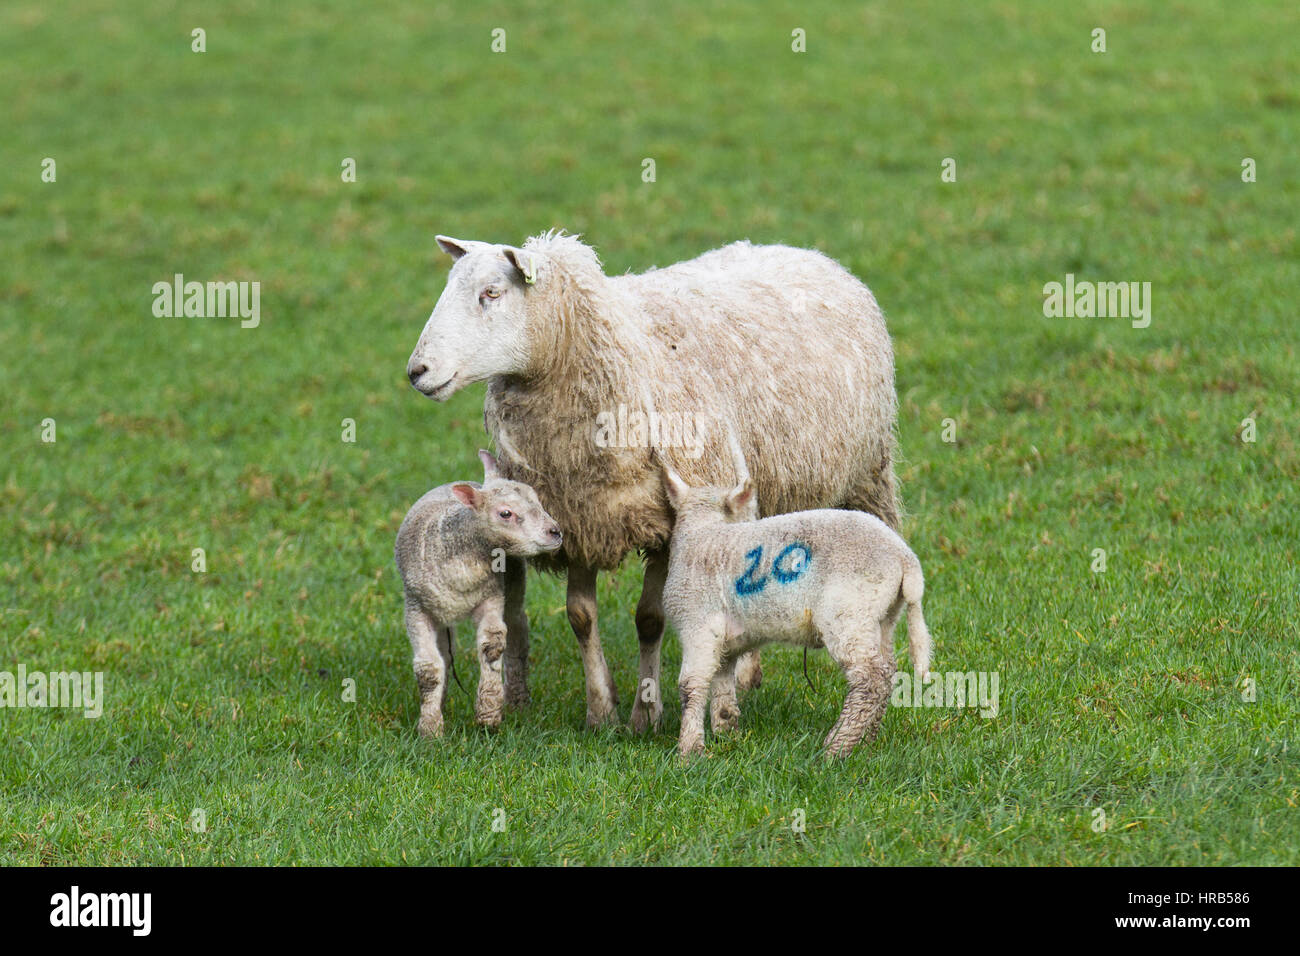 Burscough, Lancashire, UK. 1st Mar, 2017. UK Weather. New-born lambs in pasture on the 1st day of Spring. Dorset ewe with twin lambs at the Windmill Animal Farm. Dorset Sheep are the only sheep breed that can breed all year around - ideal for controlling lambing times to coincide with school holidays and half terms. Credit: MediaWorldImages/AlamyLiveNews Stock Photo